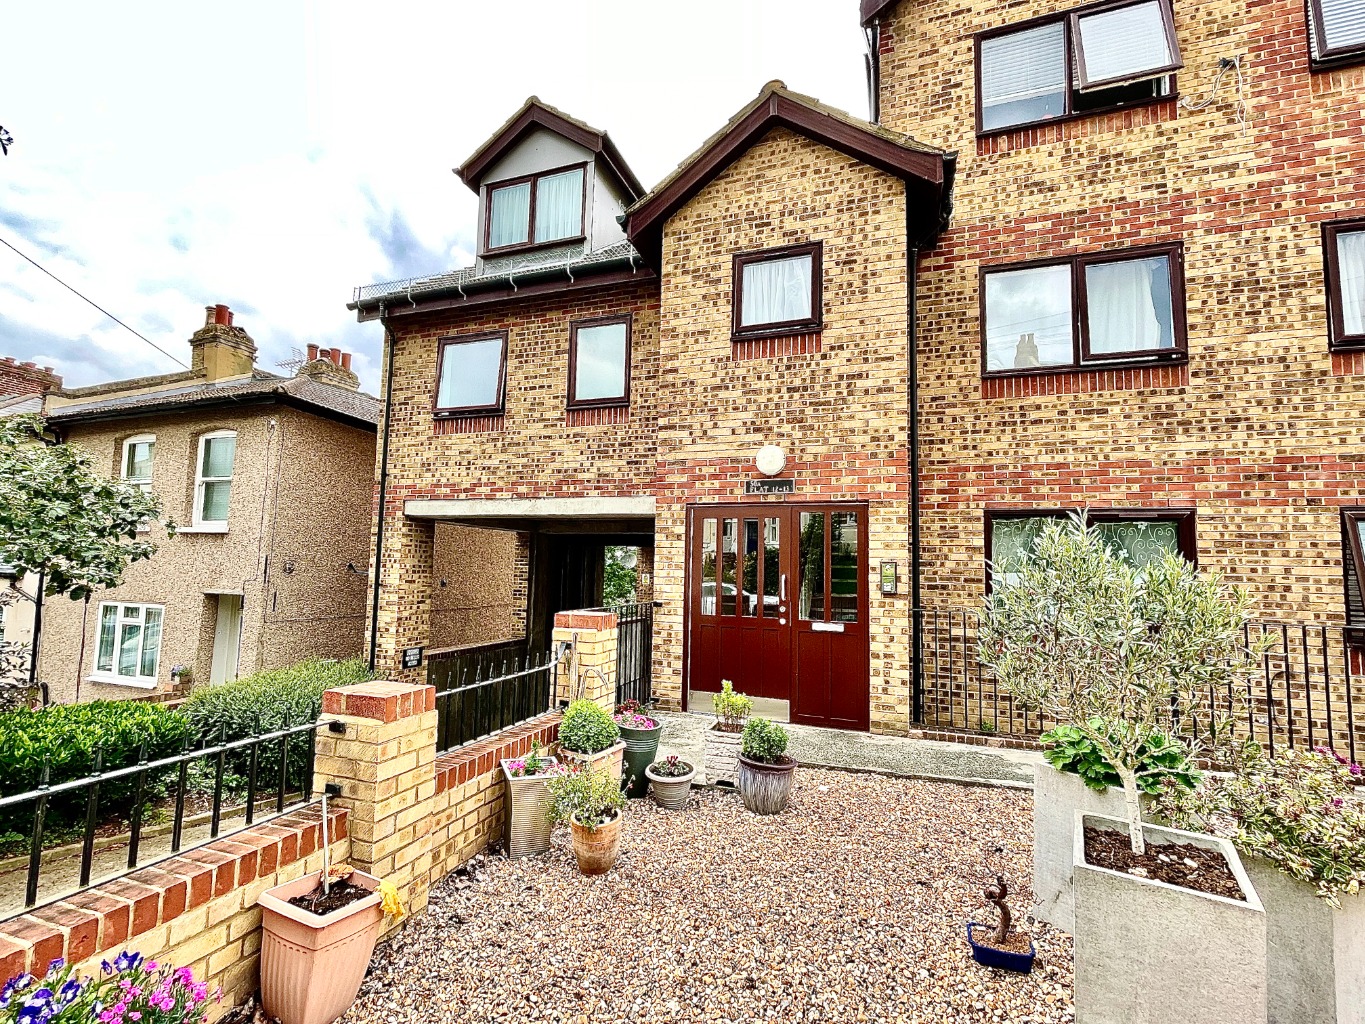 2 bed flat for sale - Property Image 1